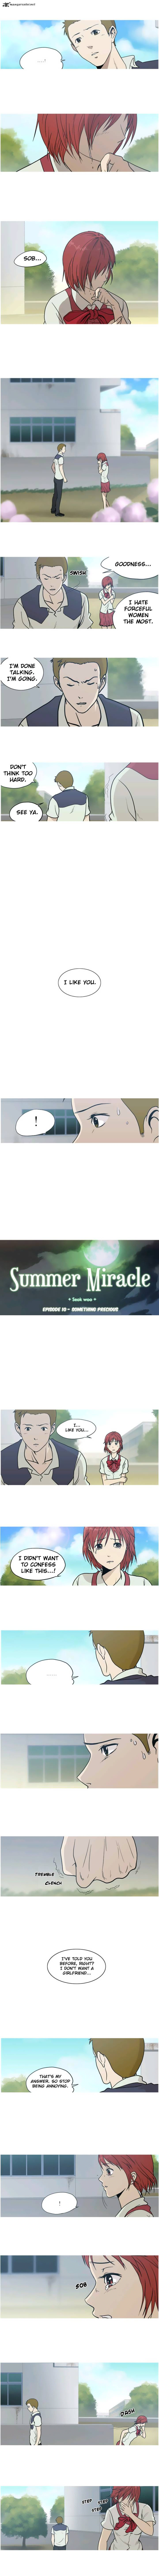 17_years_old_that_summer_days_miracle_10_2